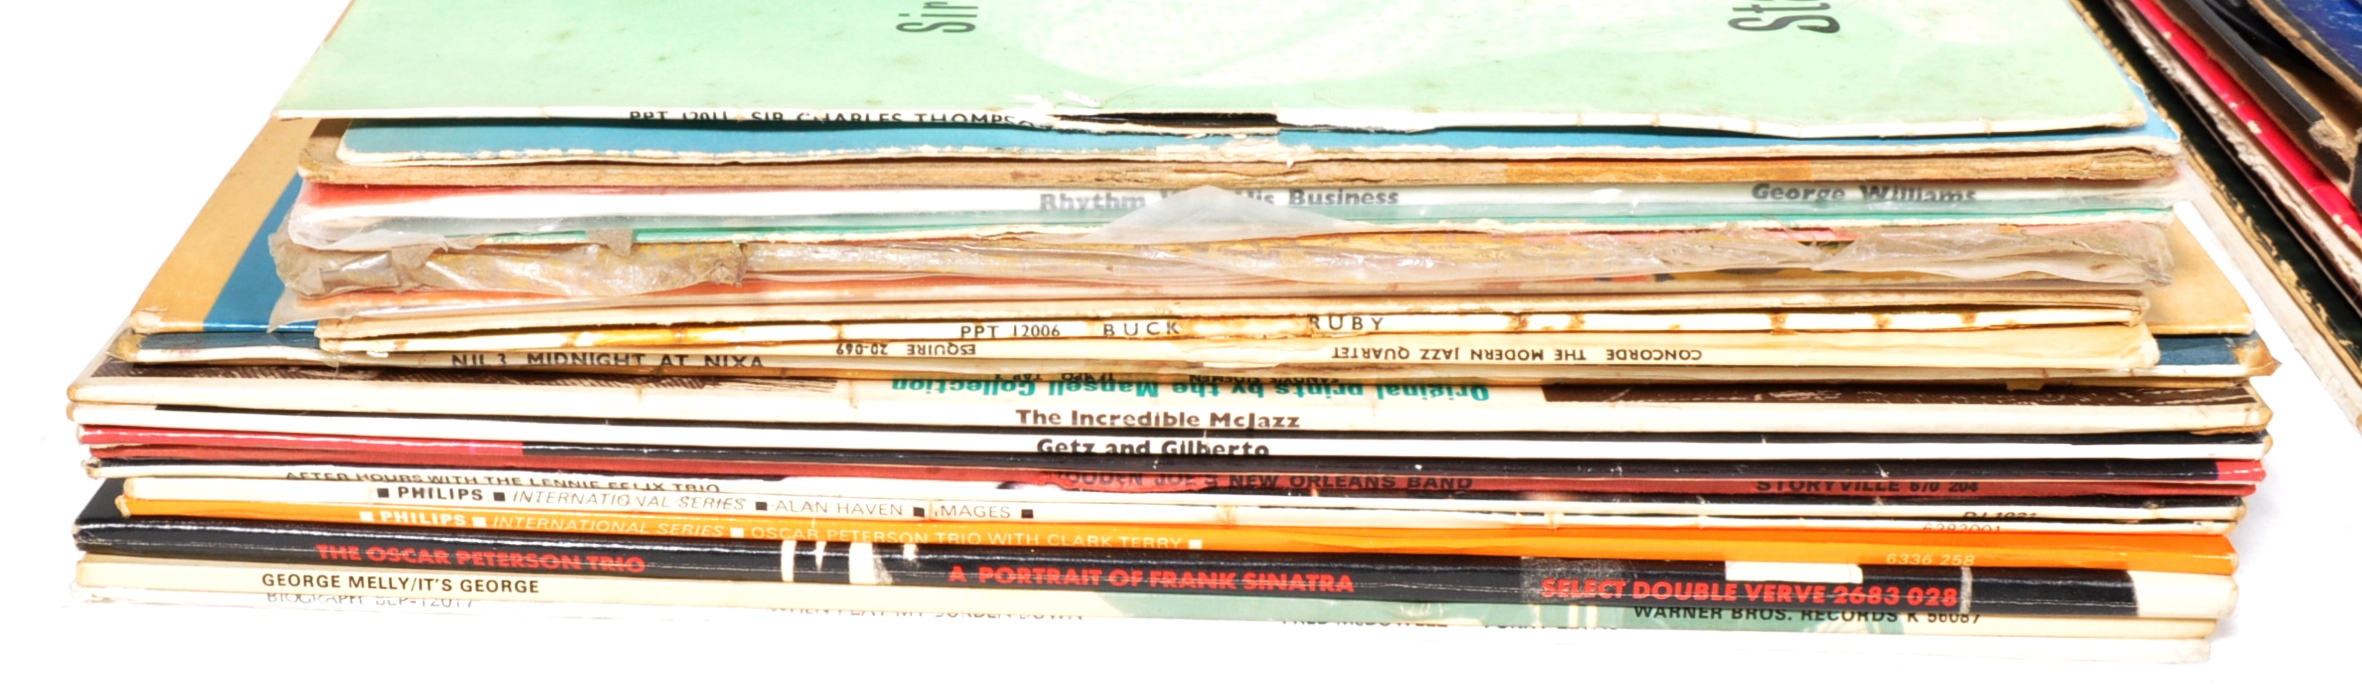 JAZZ - SELECTION OF 40+ 12" & 10" VINYL RECORDS - Image 8 of 8